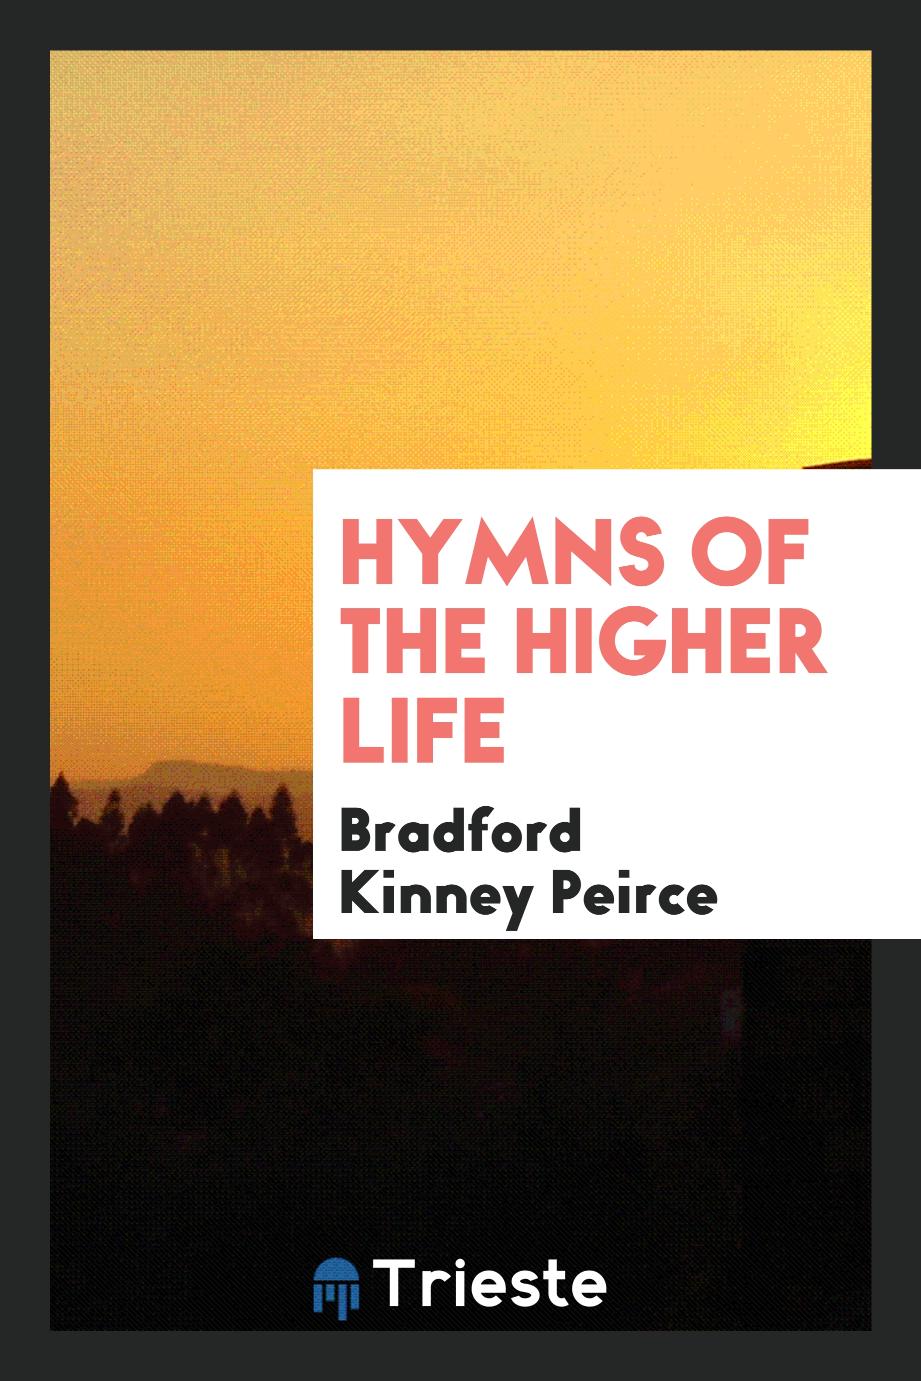 Hymns of the Higher Life